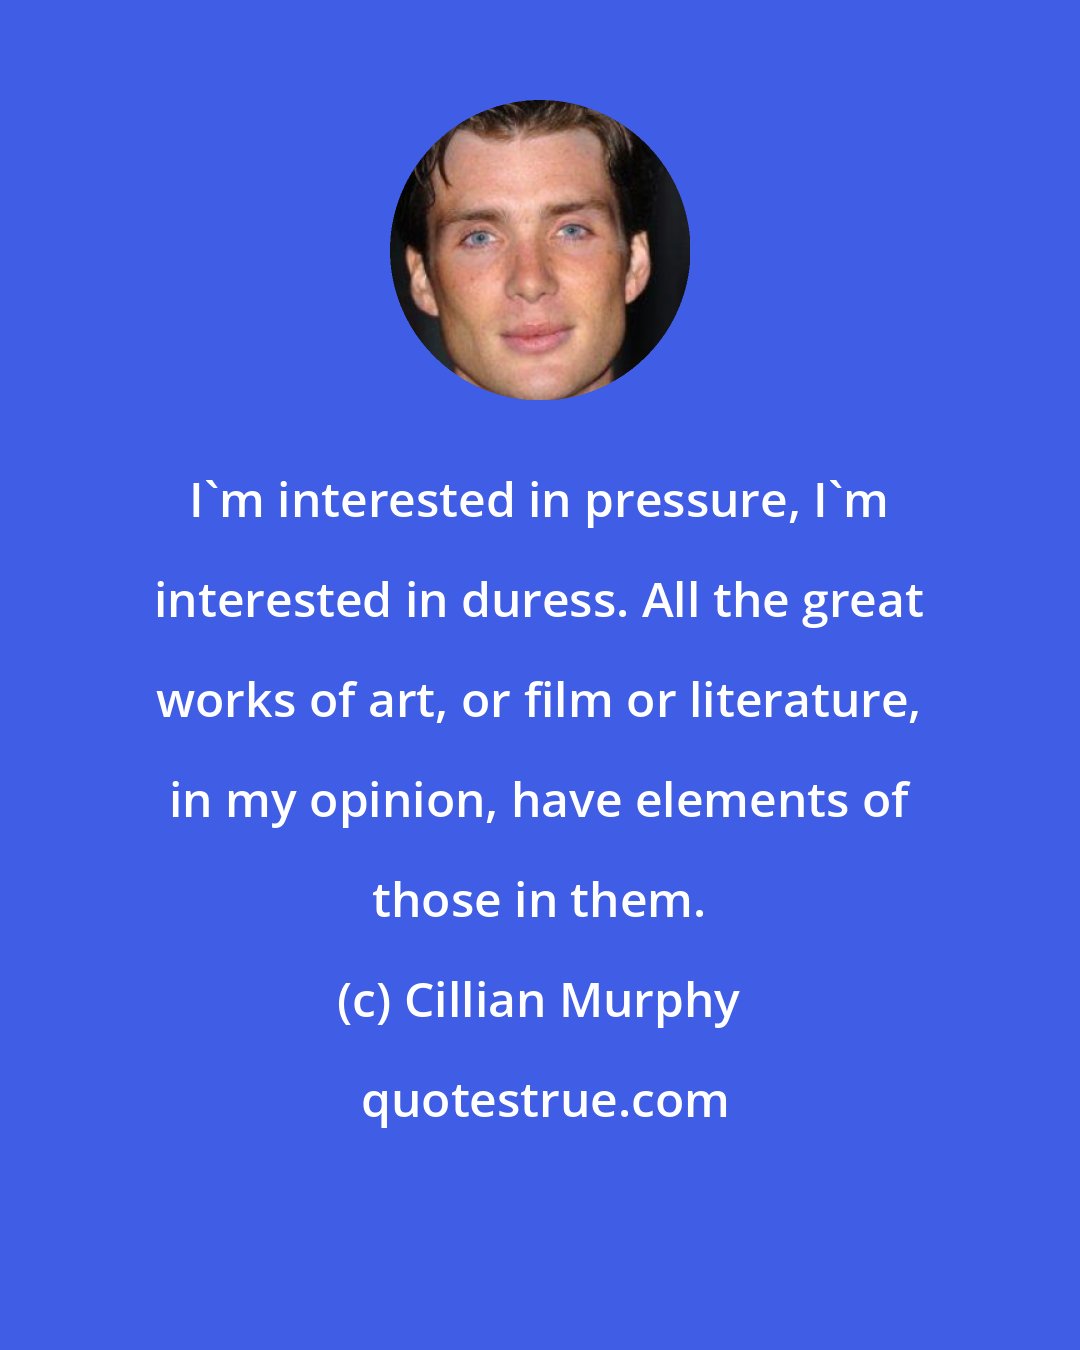 Cillian Murphy: I'm interested in pressure, I'm interested in duress. All the great works of art, or film or literature, in my opinion, have elements of those in them.